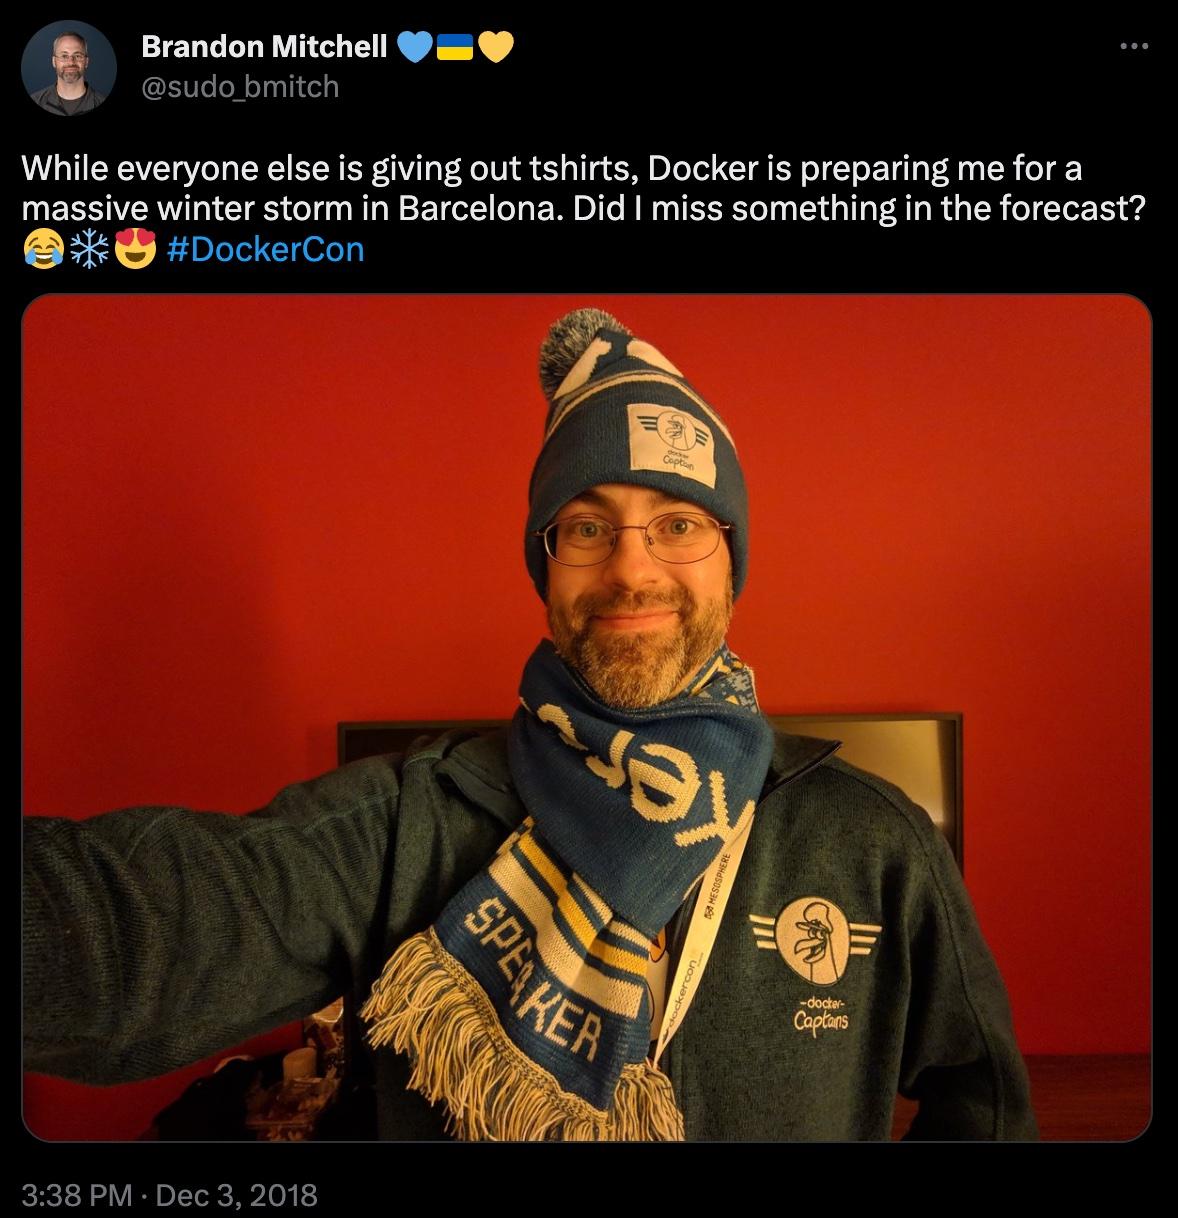 Twitter screenshot of Brandon Mitchell bundled up with Docker swag. Caption reads, "While everyone else is giving out tshirts, Docker is preparing me for a massive winter storm in Barcelona. Did I miss something in the forecast?"